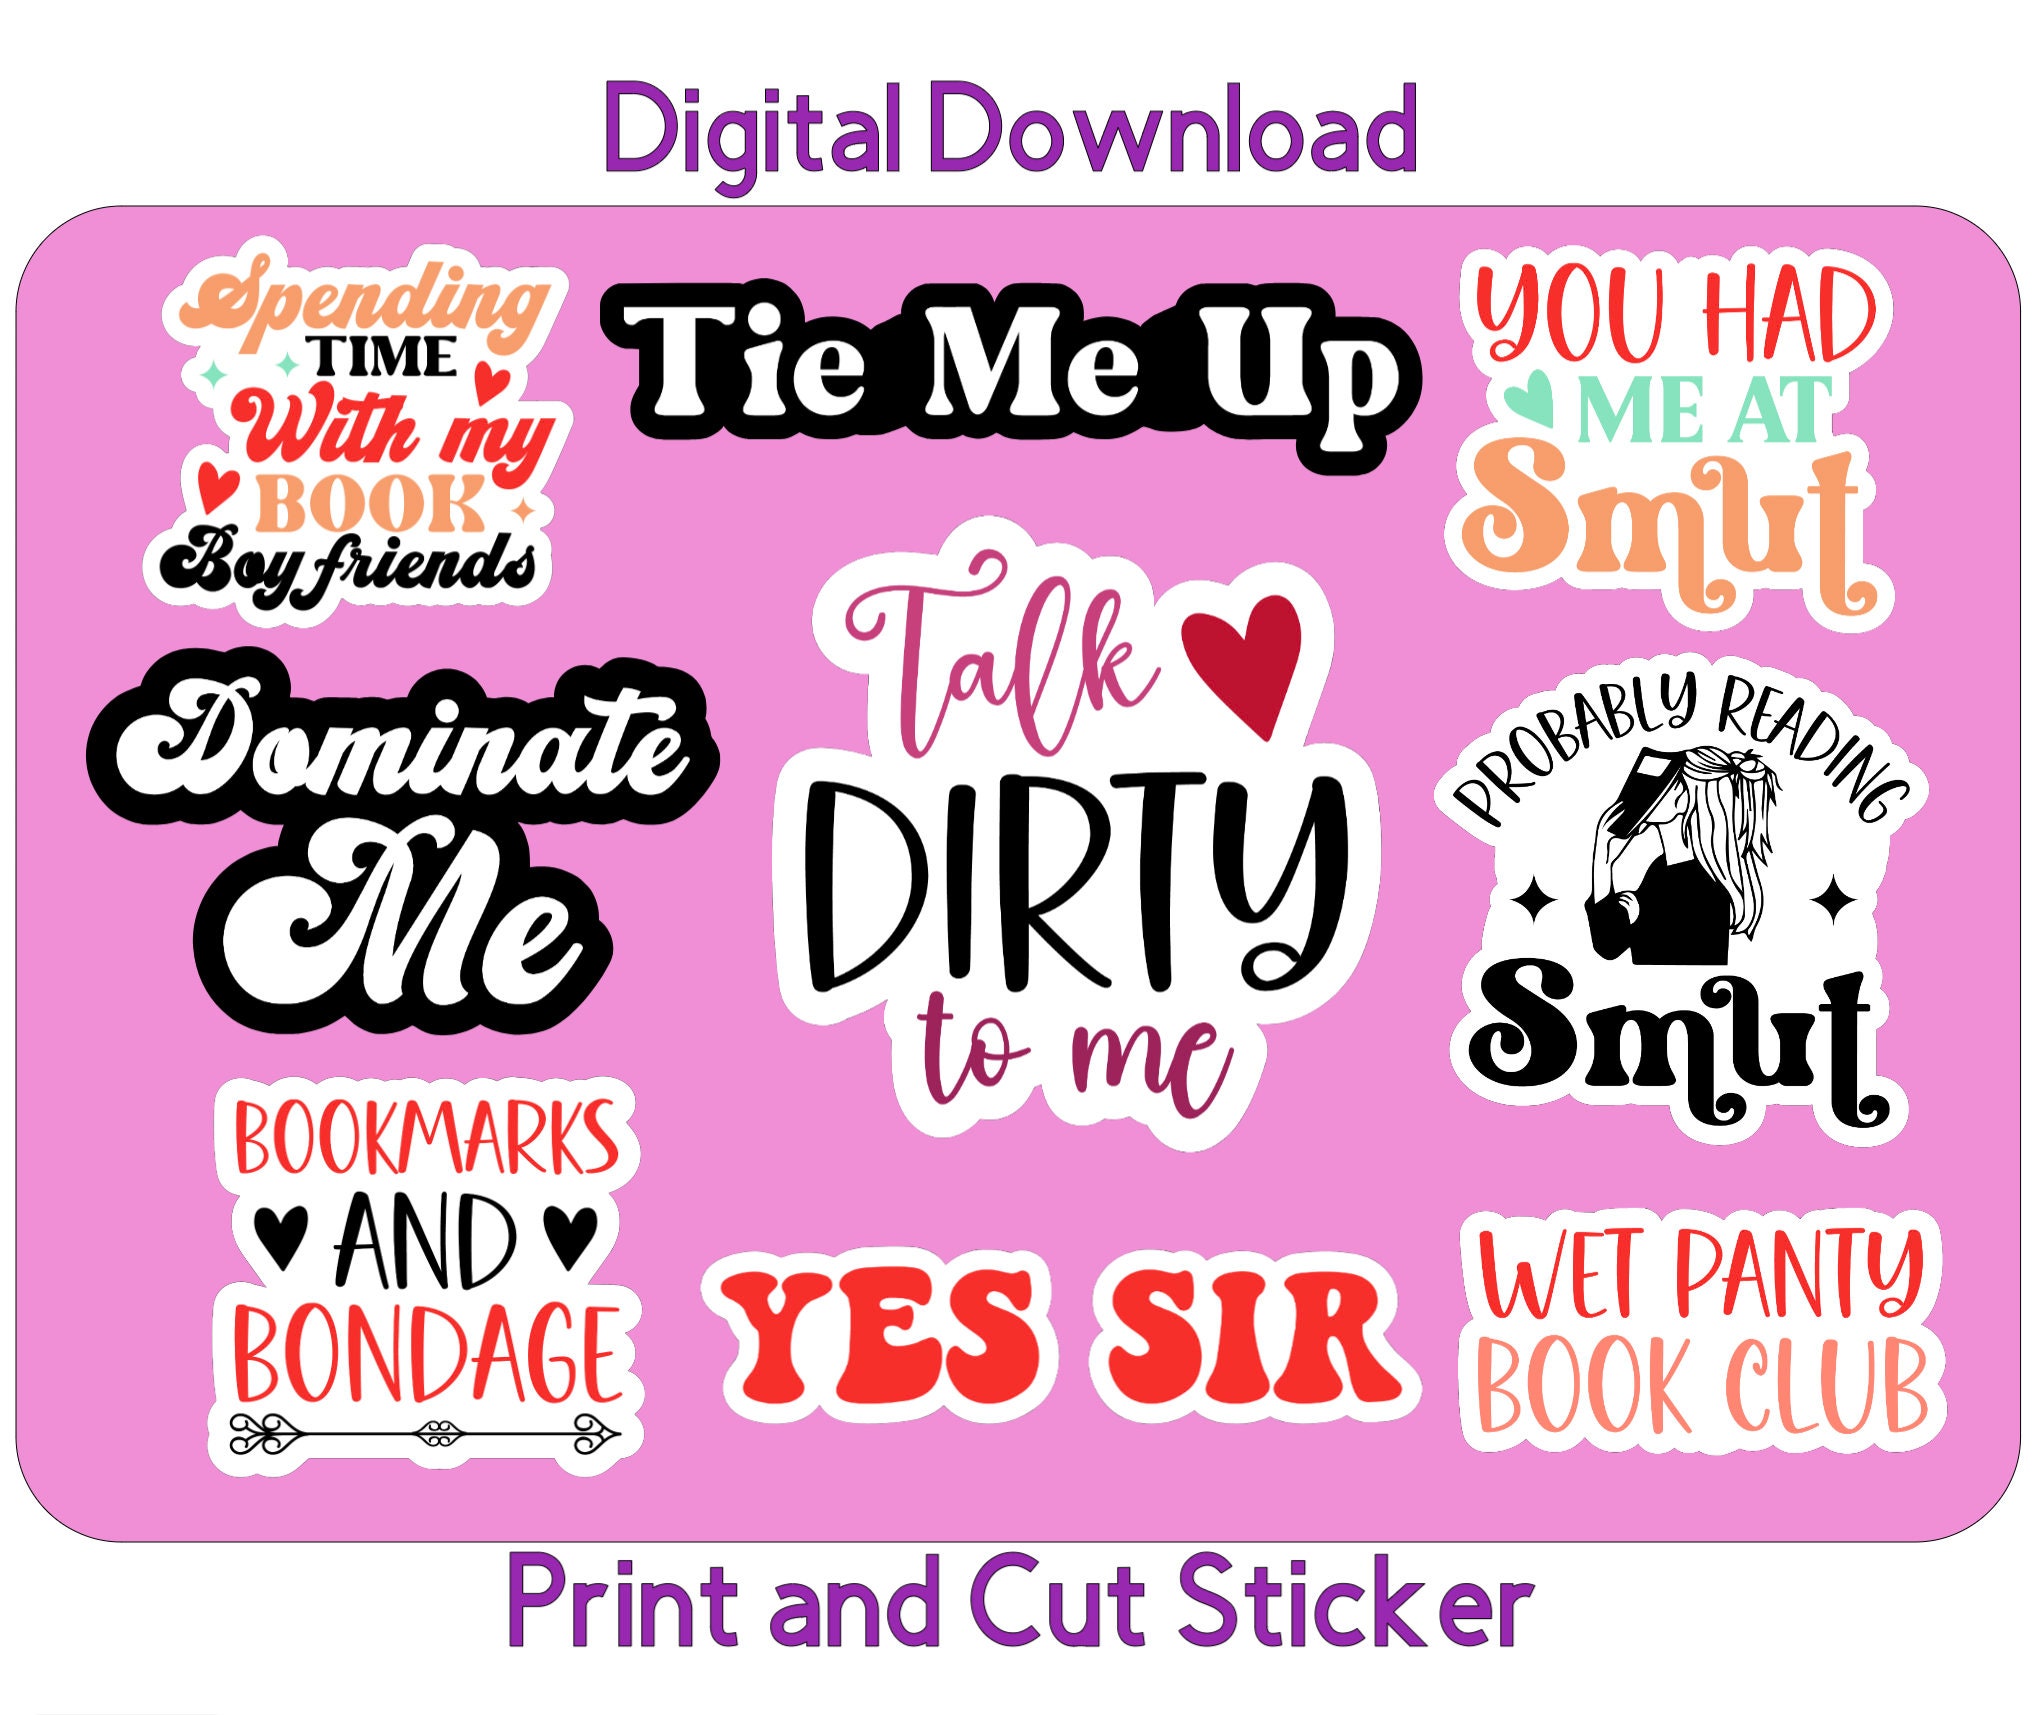 My Smutty Books Are Not Your Business Die Cut Sticker